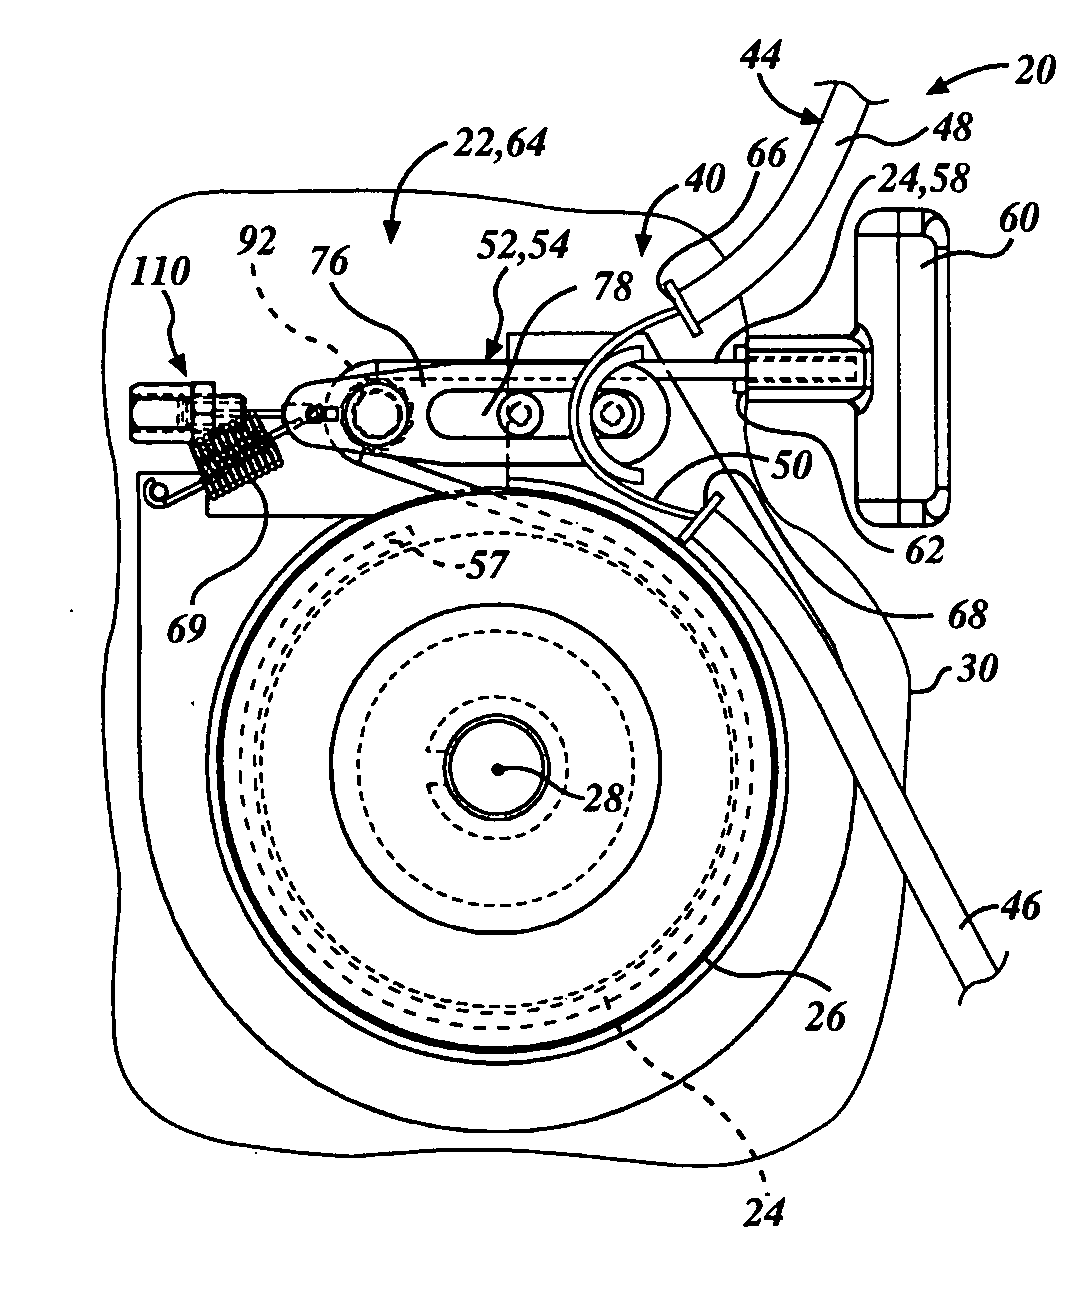 Combustion engine pull-cord start system